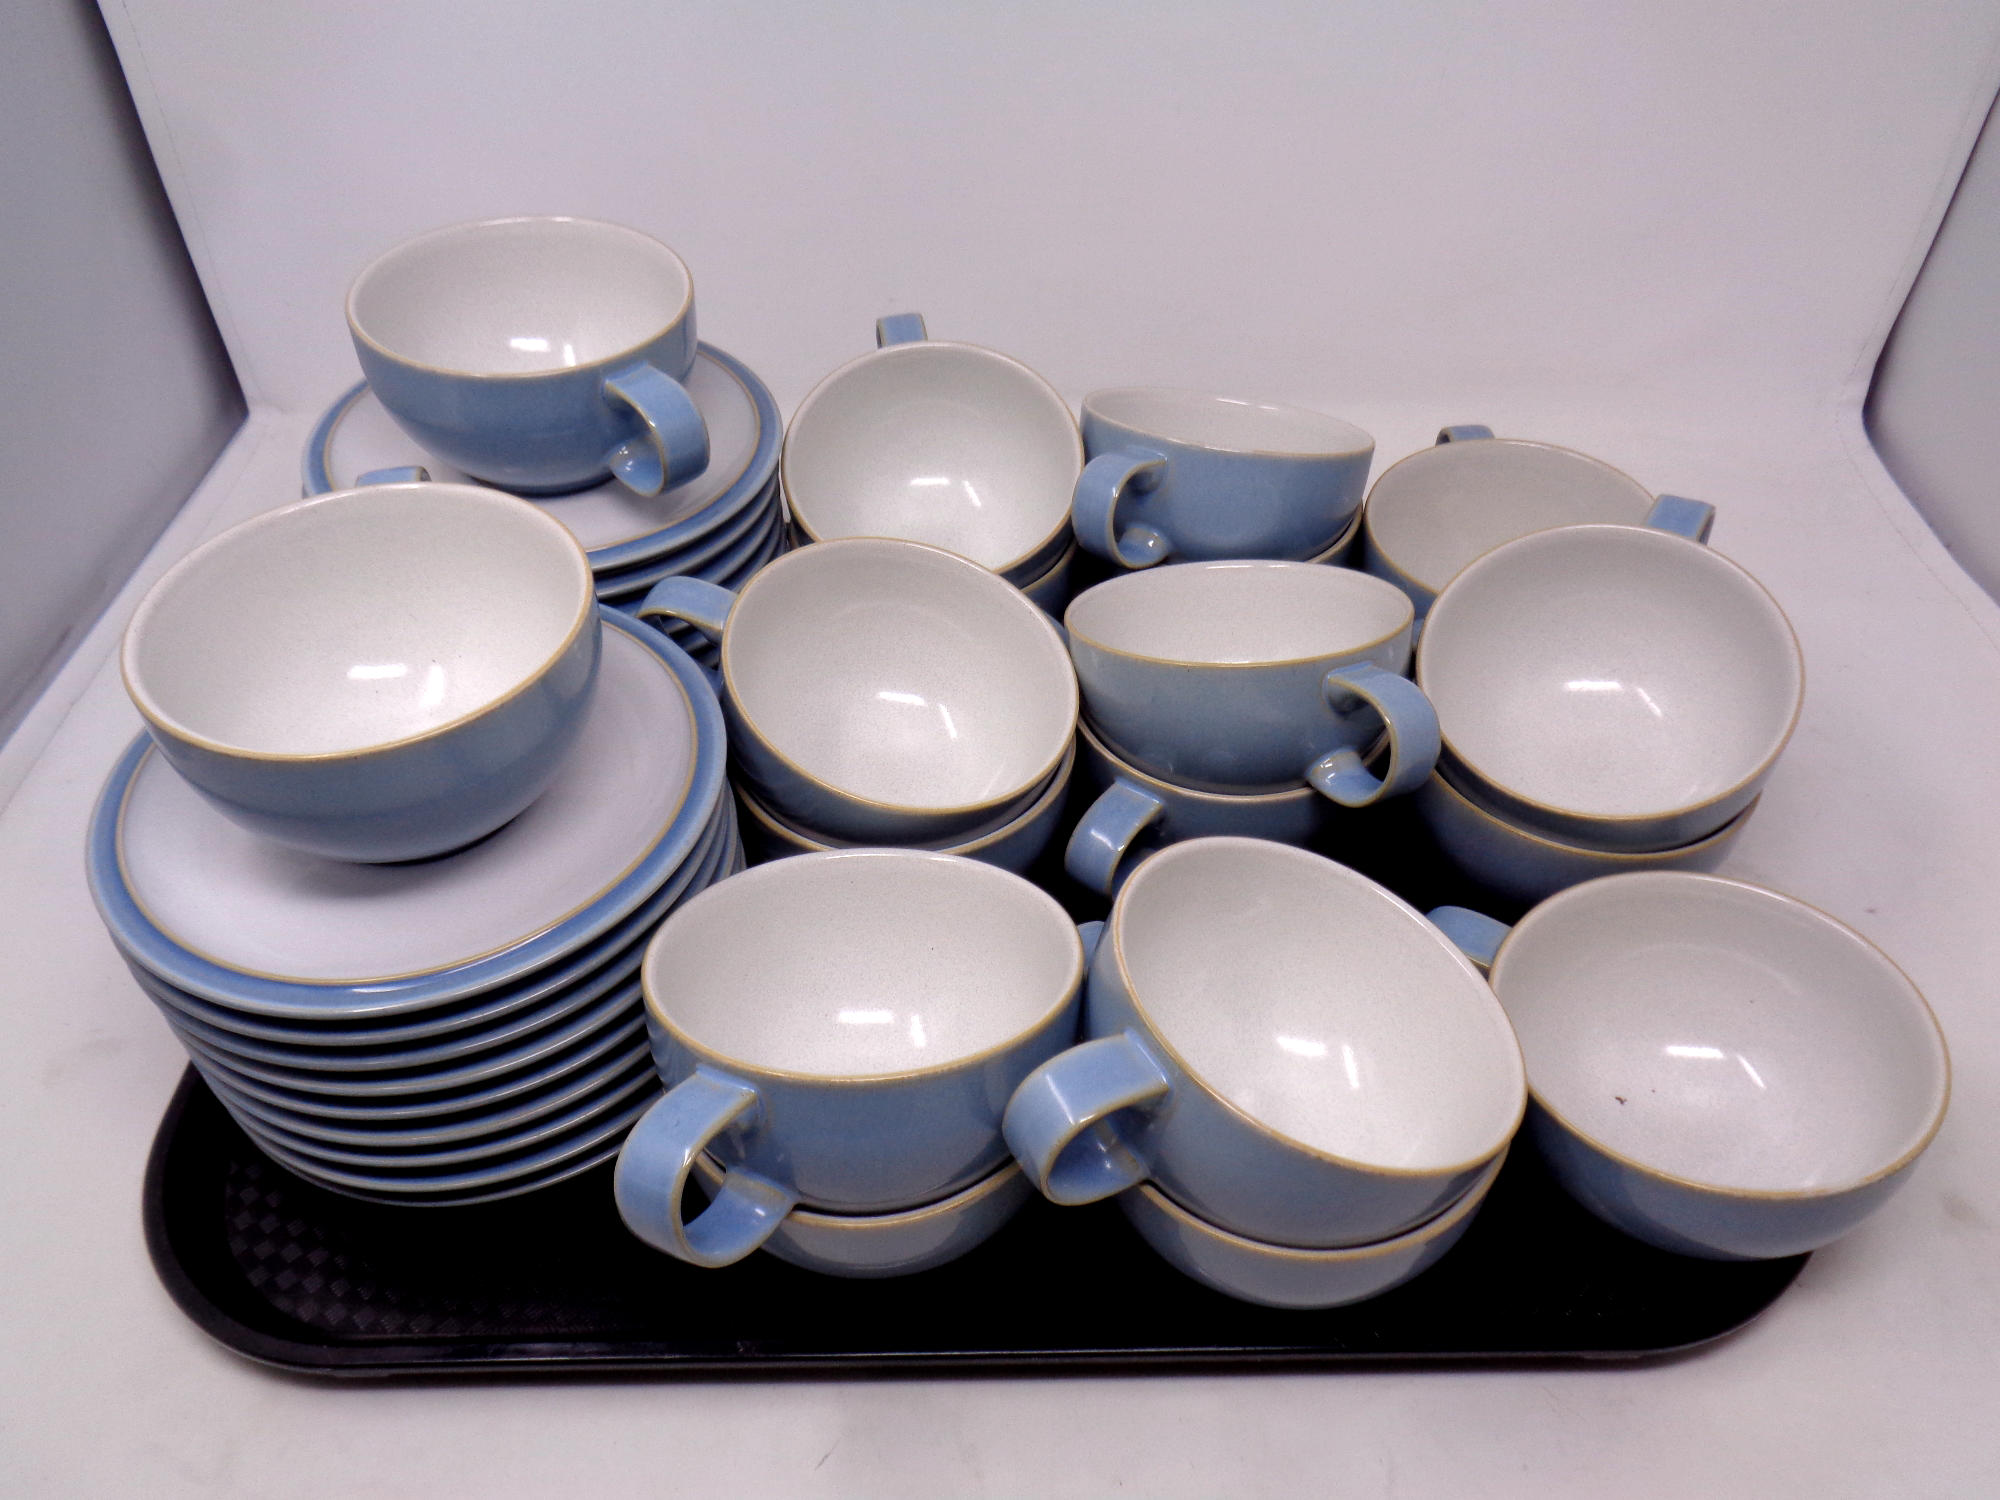 A tray containing eighteen Denby Colonial Blue teacups and saucers